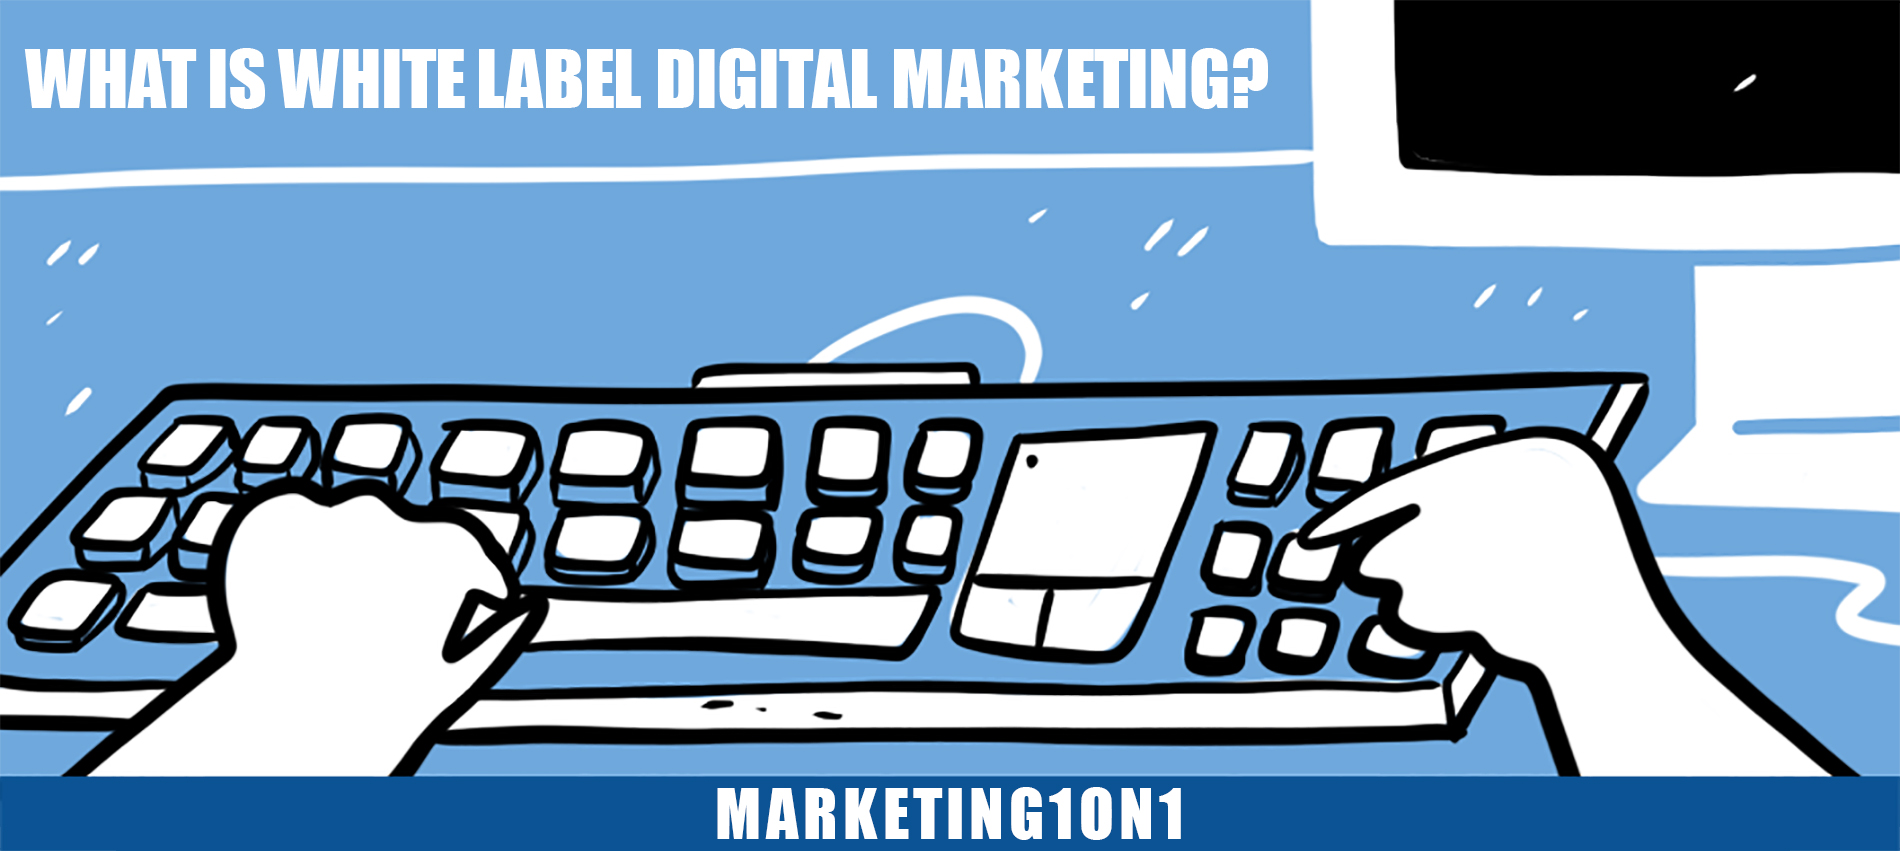 what is white label digital marketing?